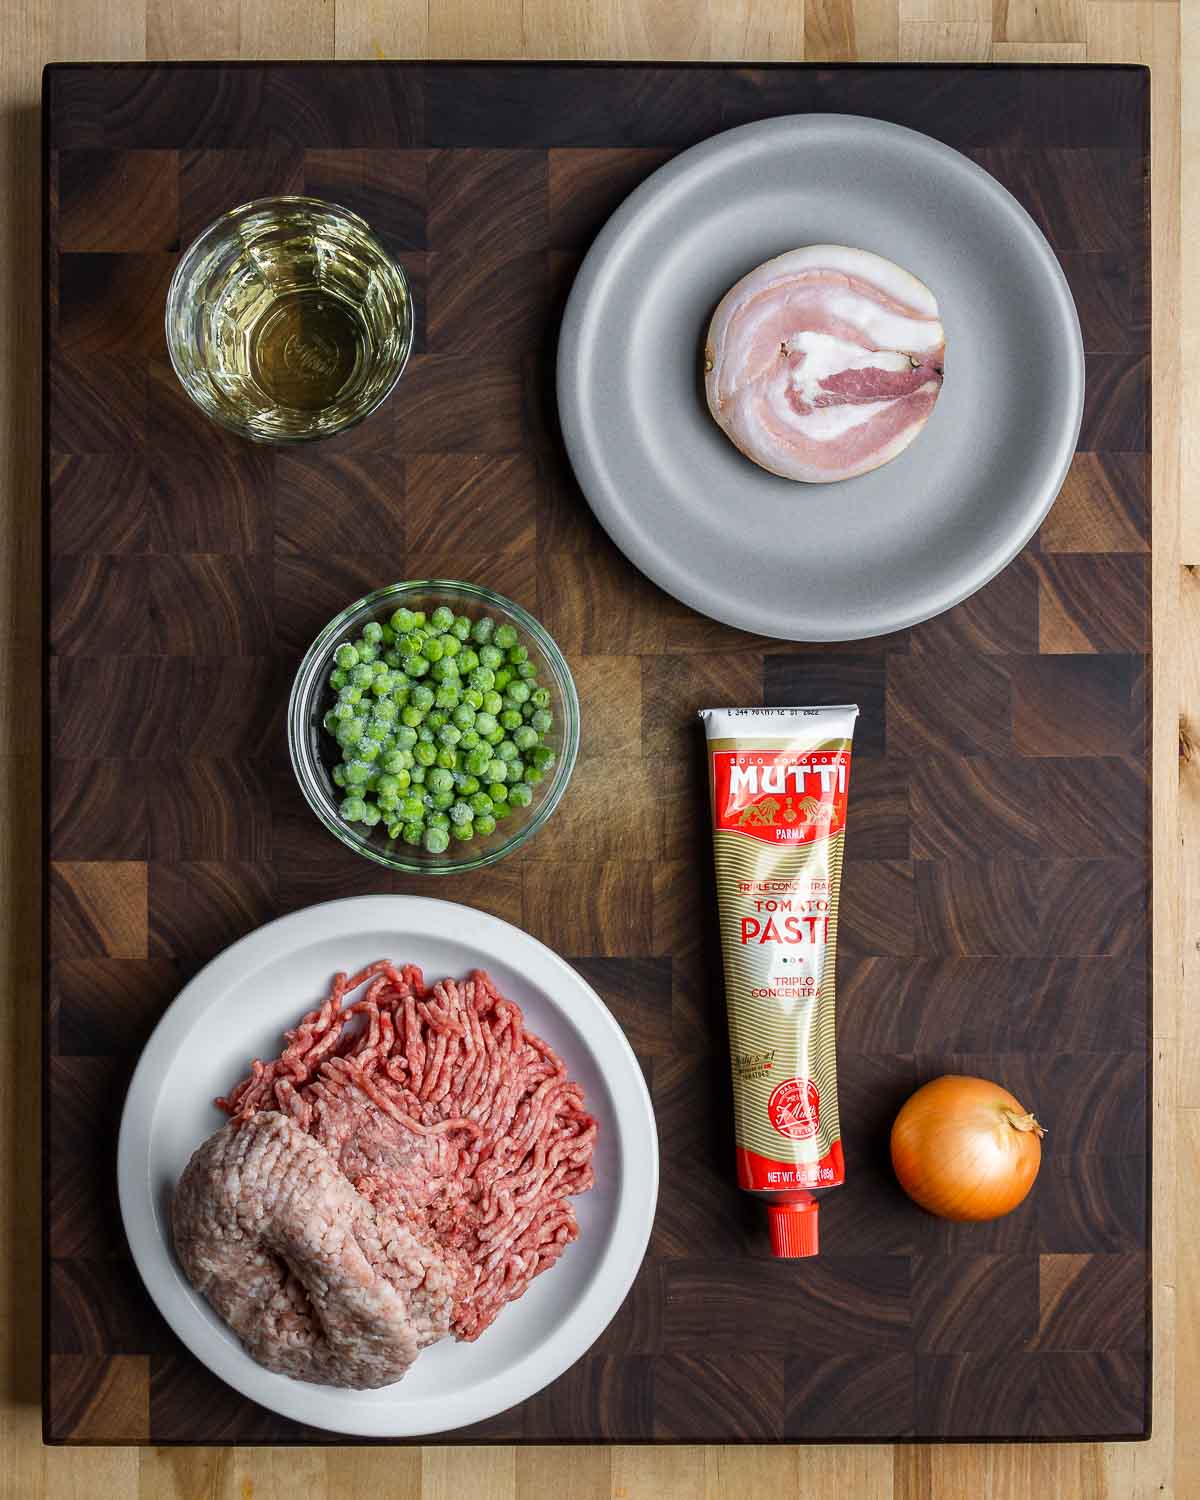 Ingredients shown: white wine, pancetta, peas, ground beef and ground pork, tomato paste, and a small onion.